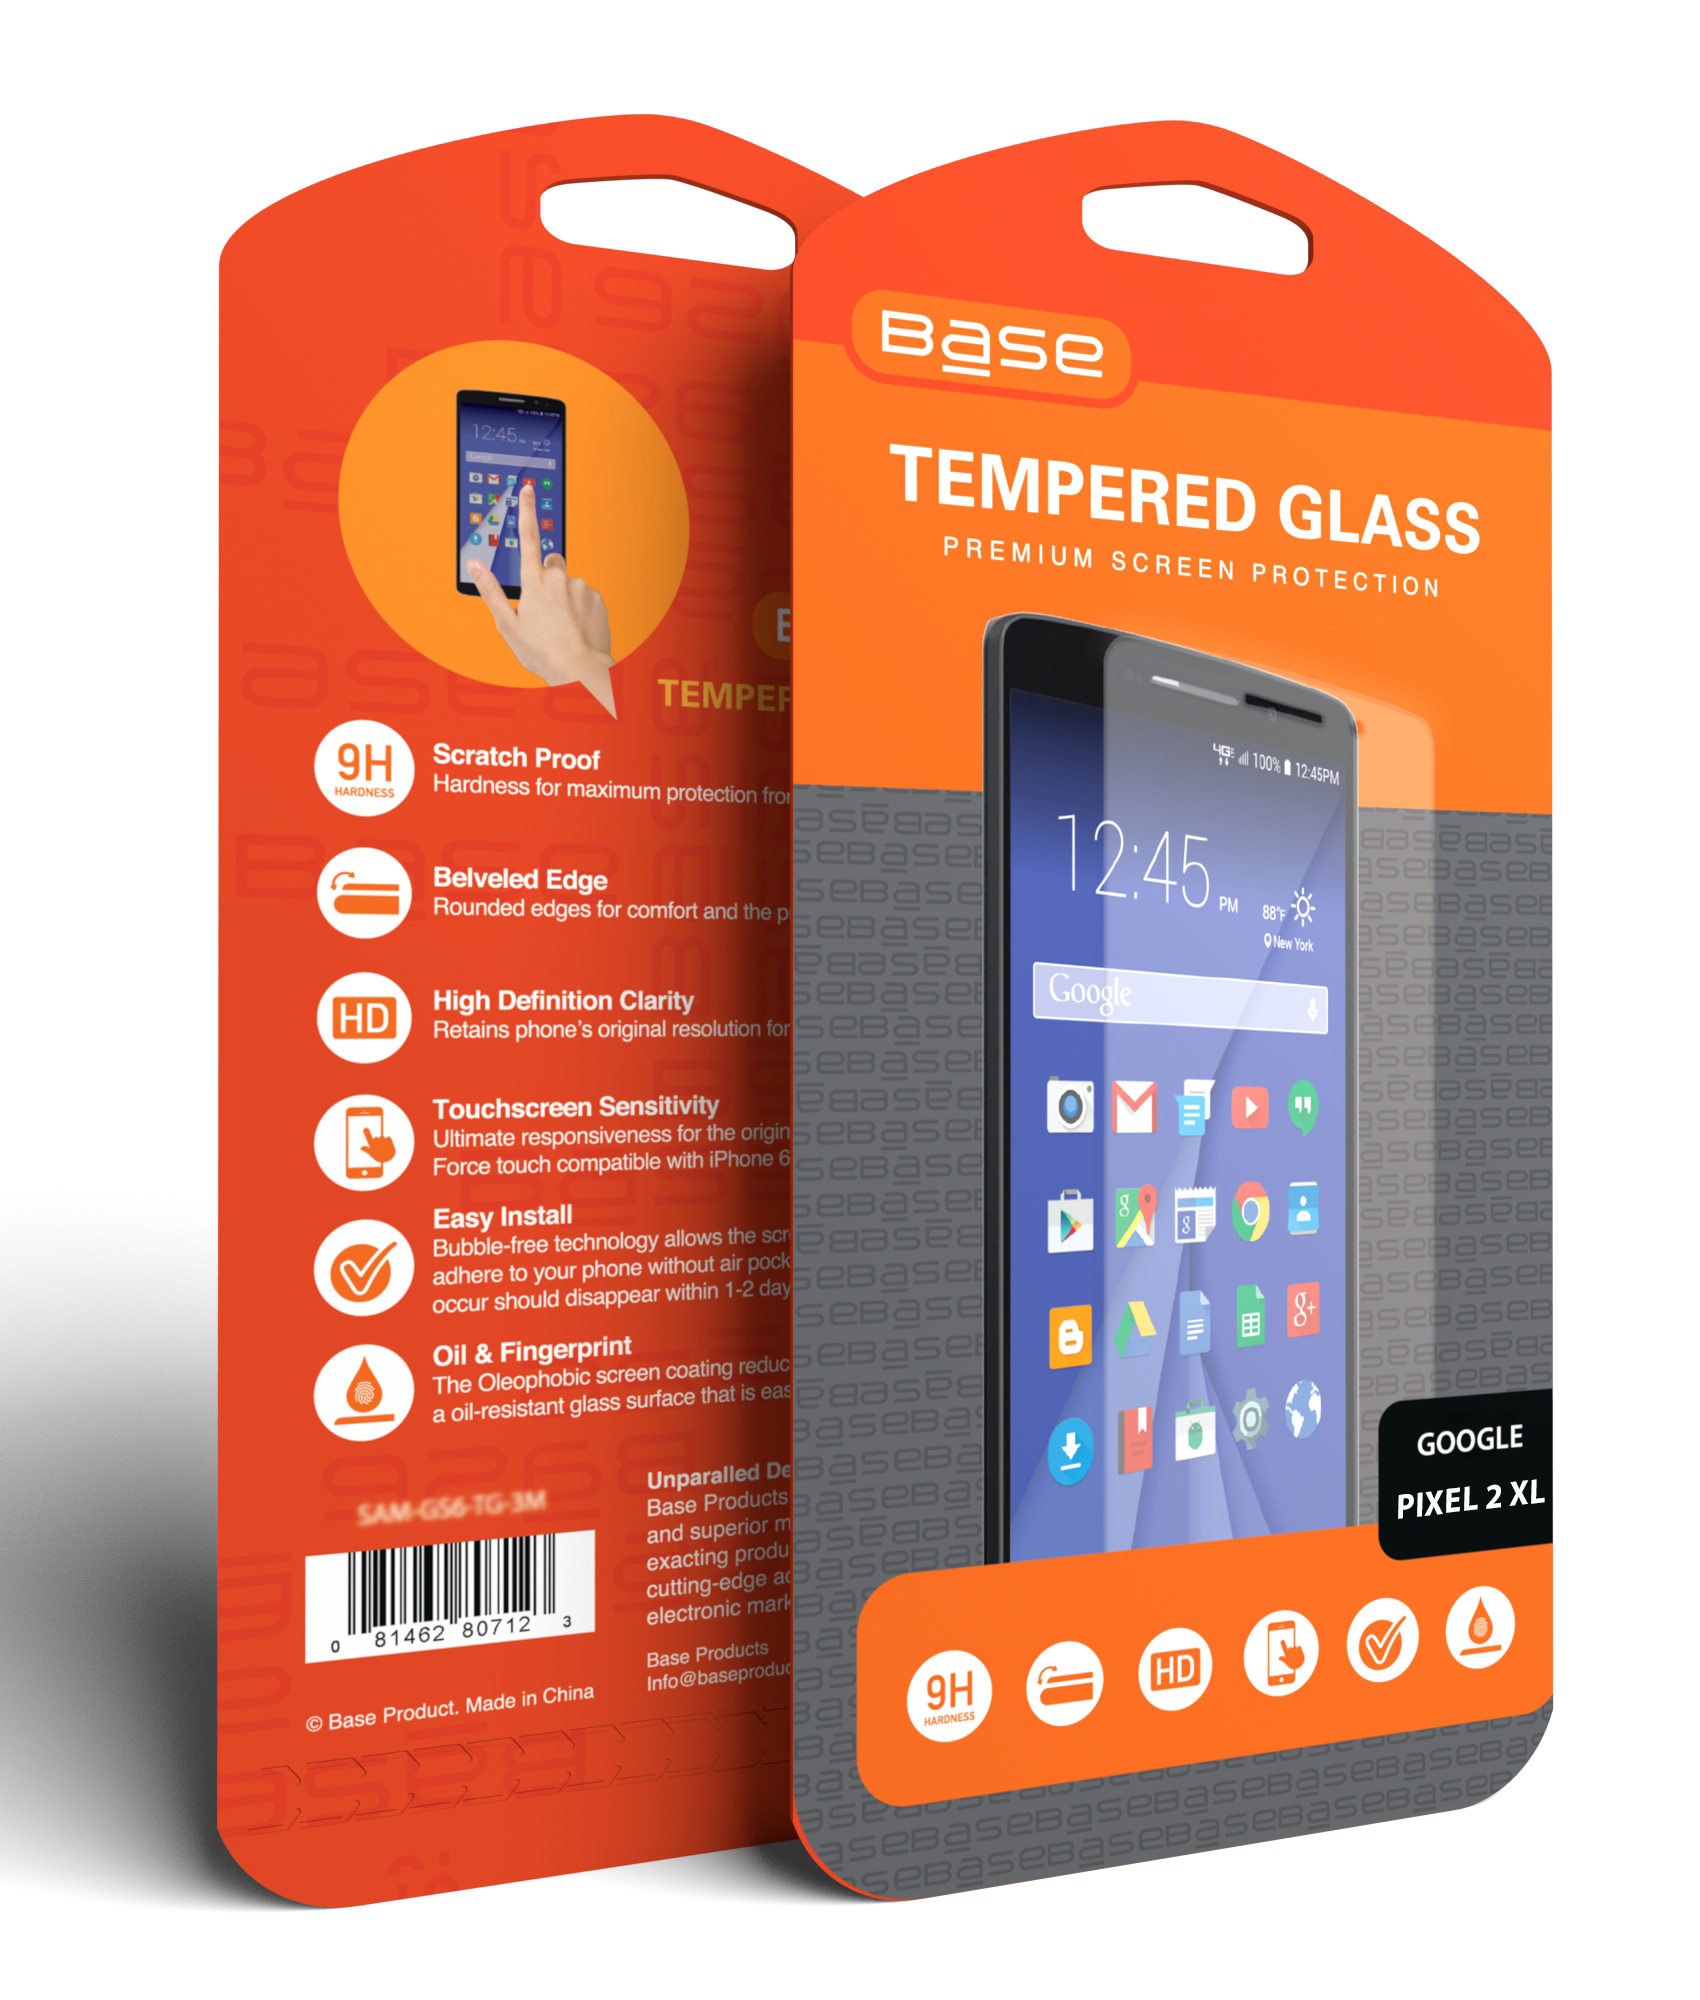 Base Premium Tempered Glass Screen Protector for Google Pixel 2 XL